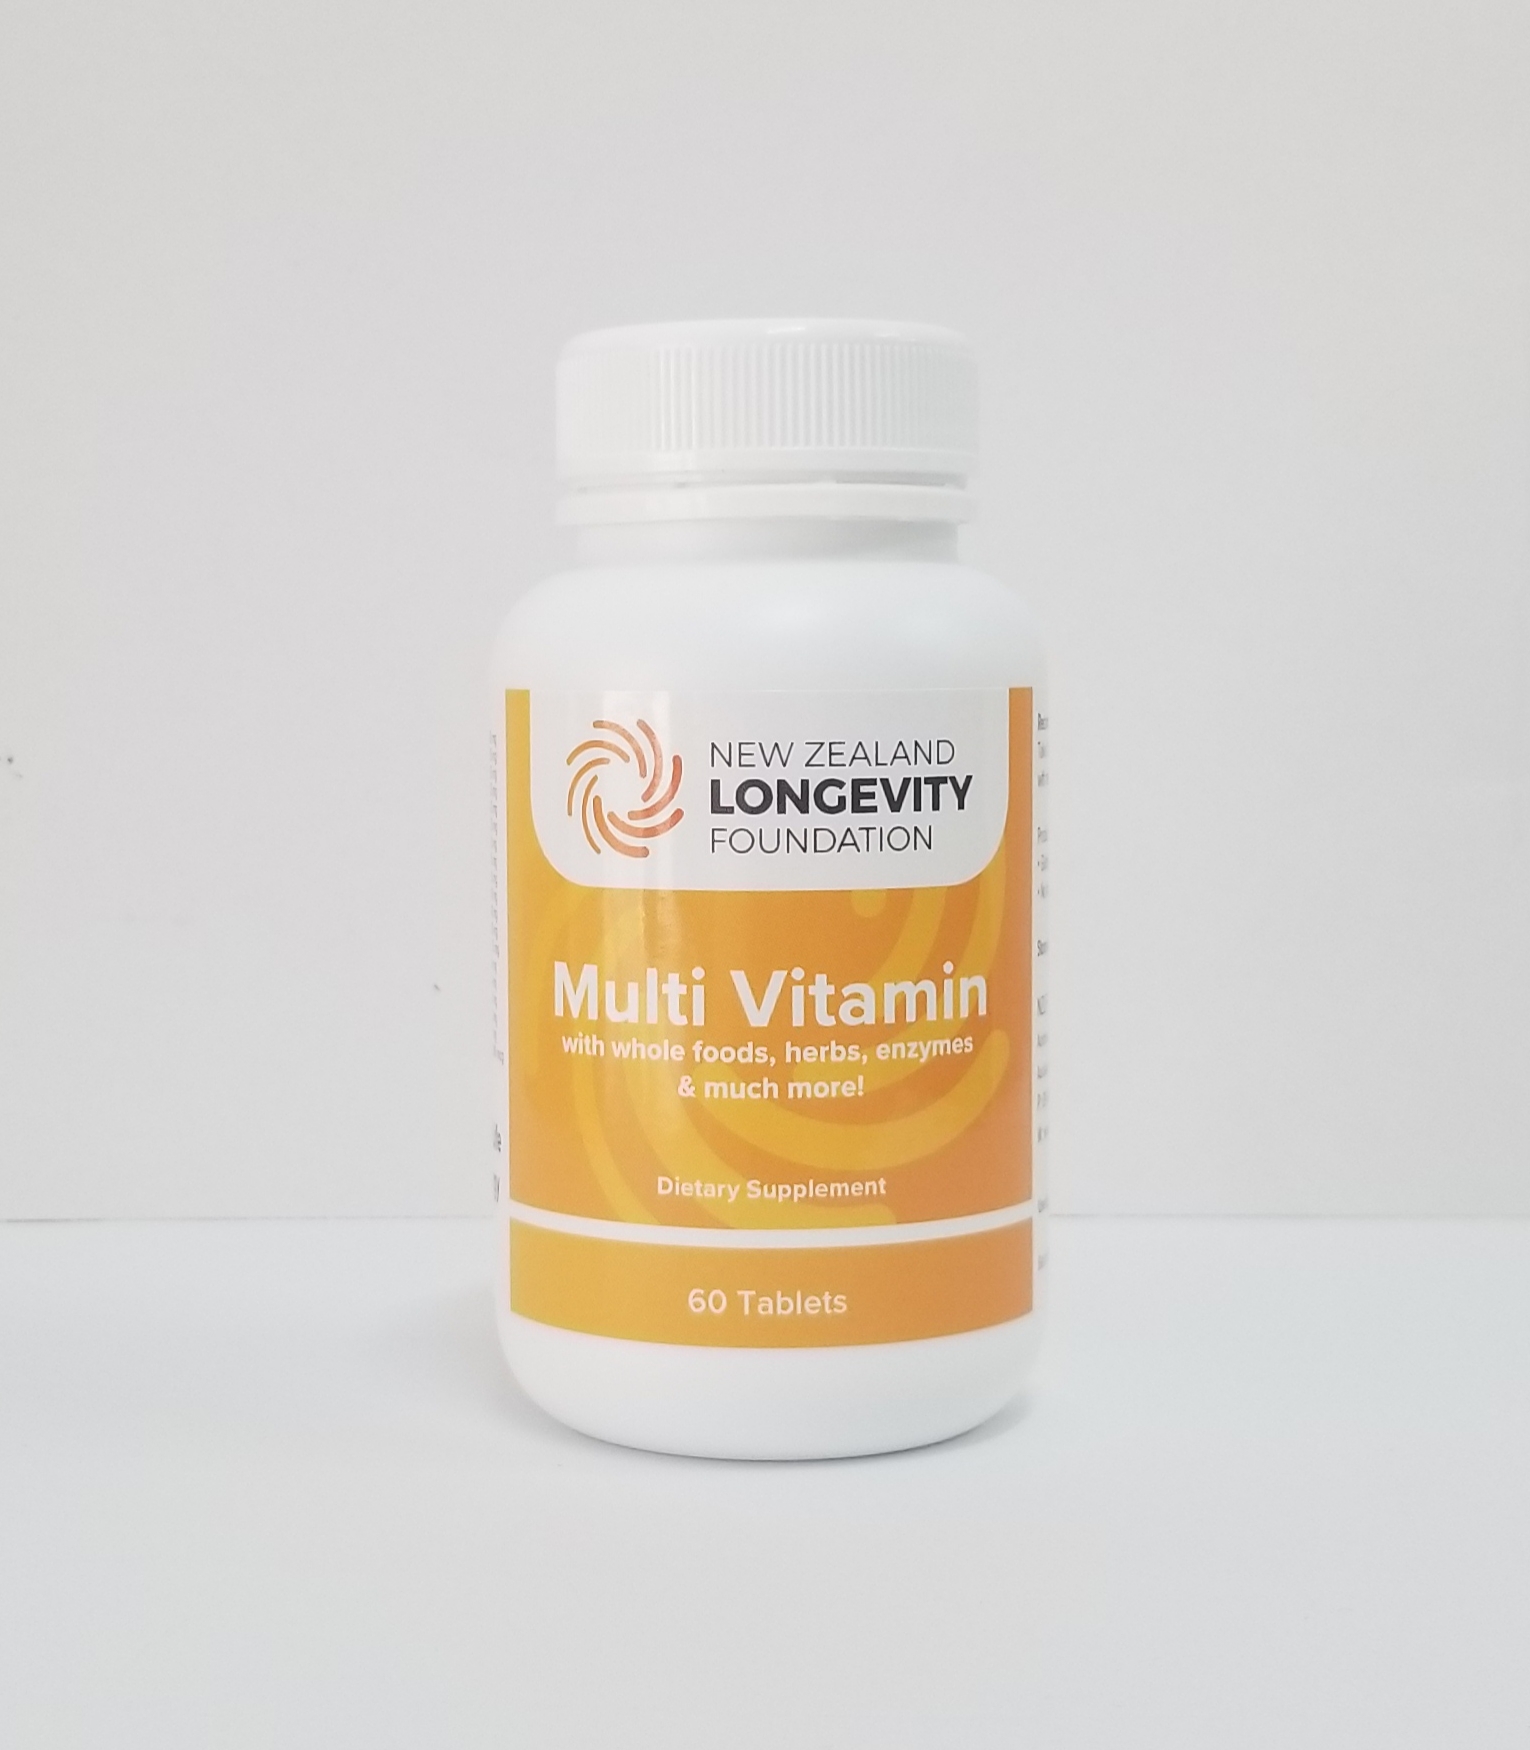 Multi Vitamin with whole foods & herbs 60 Tablets